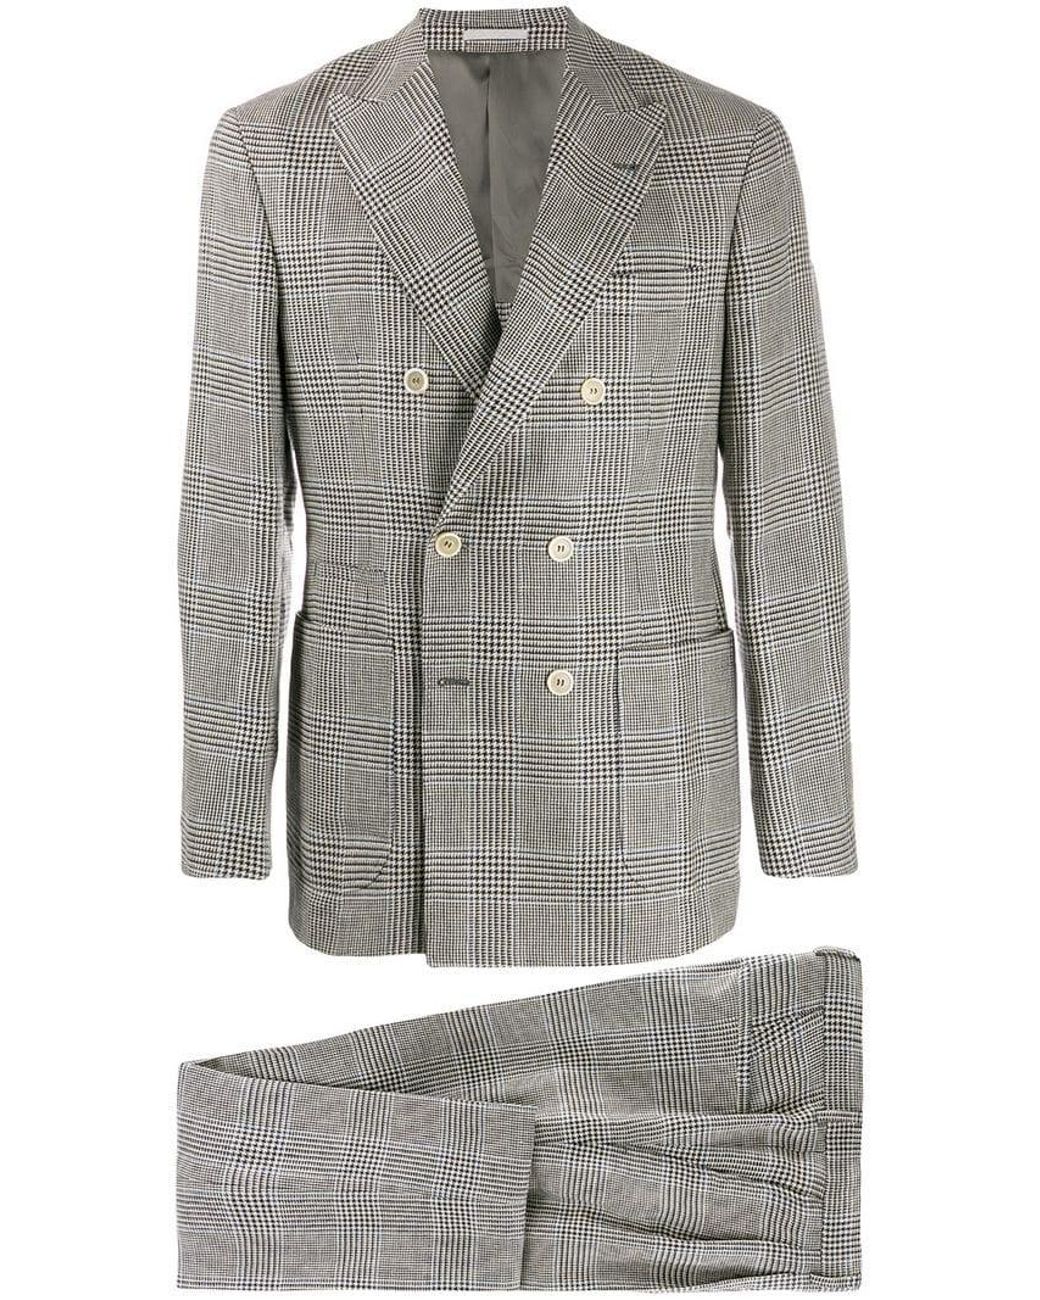 Brunello Cucinelli Houndstooth Check Two-piece Suit in Gray for Men - Lyst